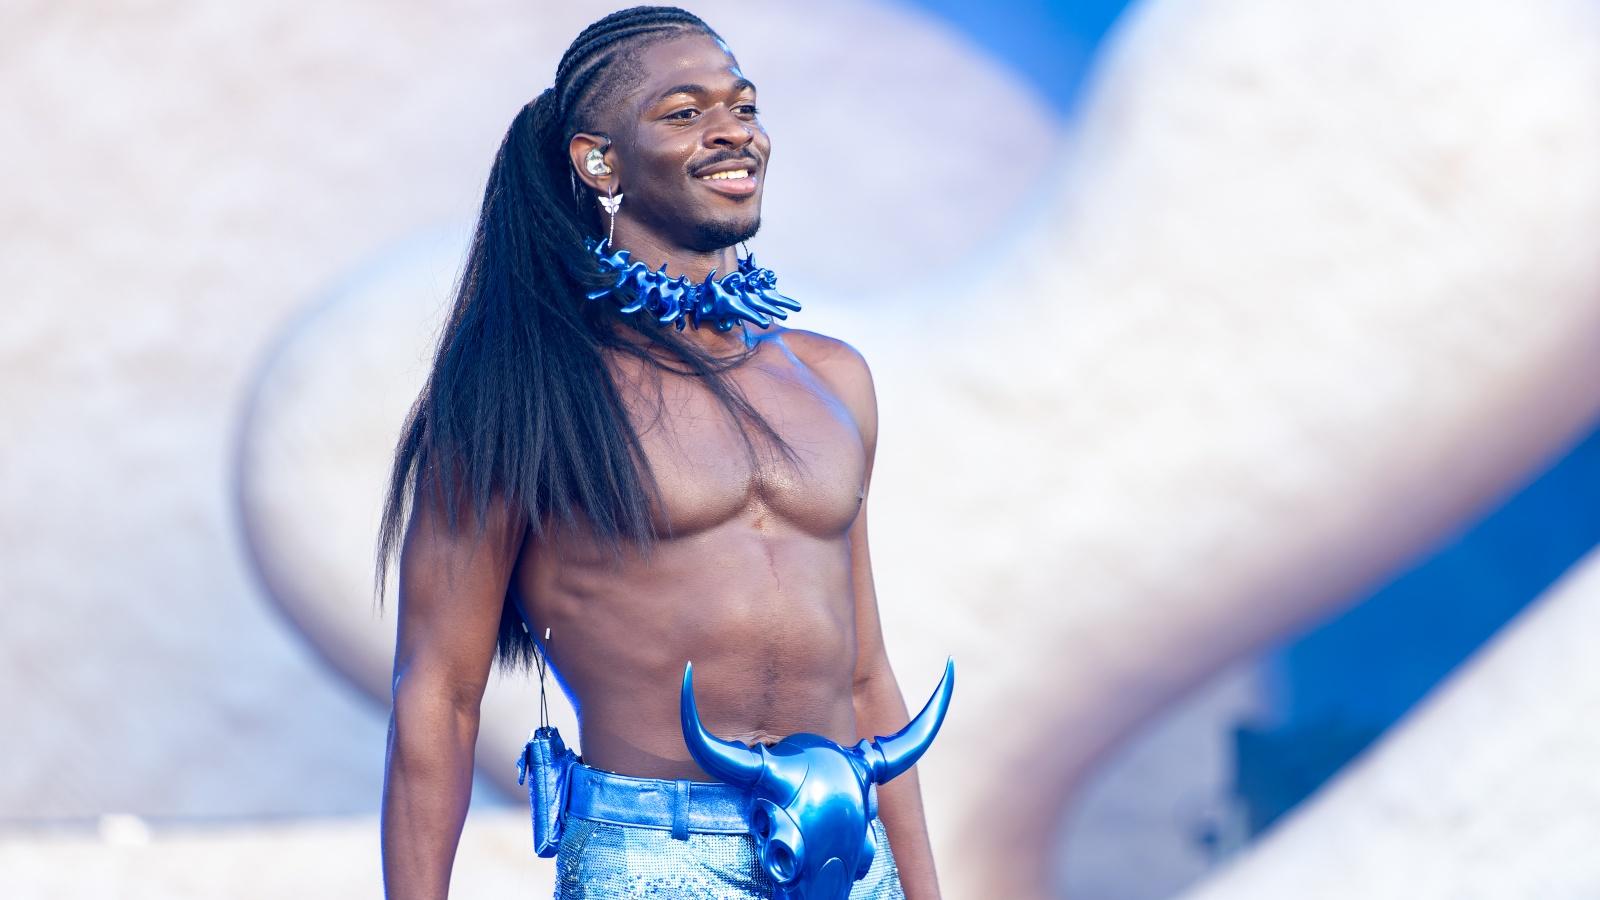 Lil Nas X performing onstage during a concert